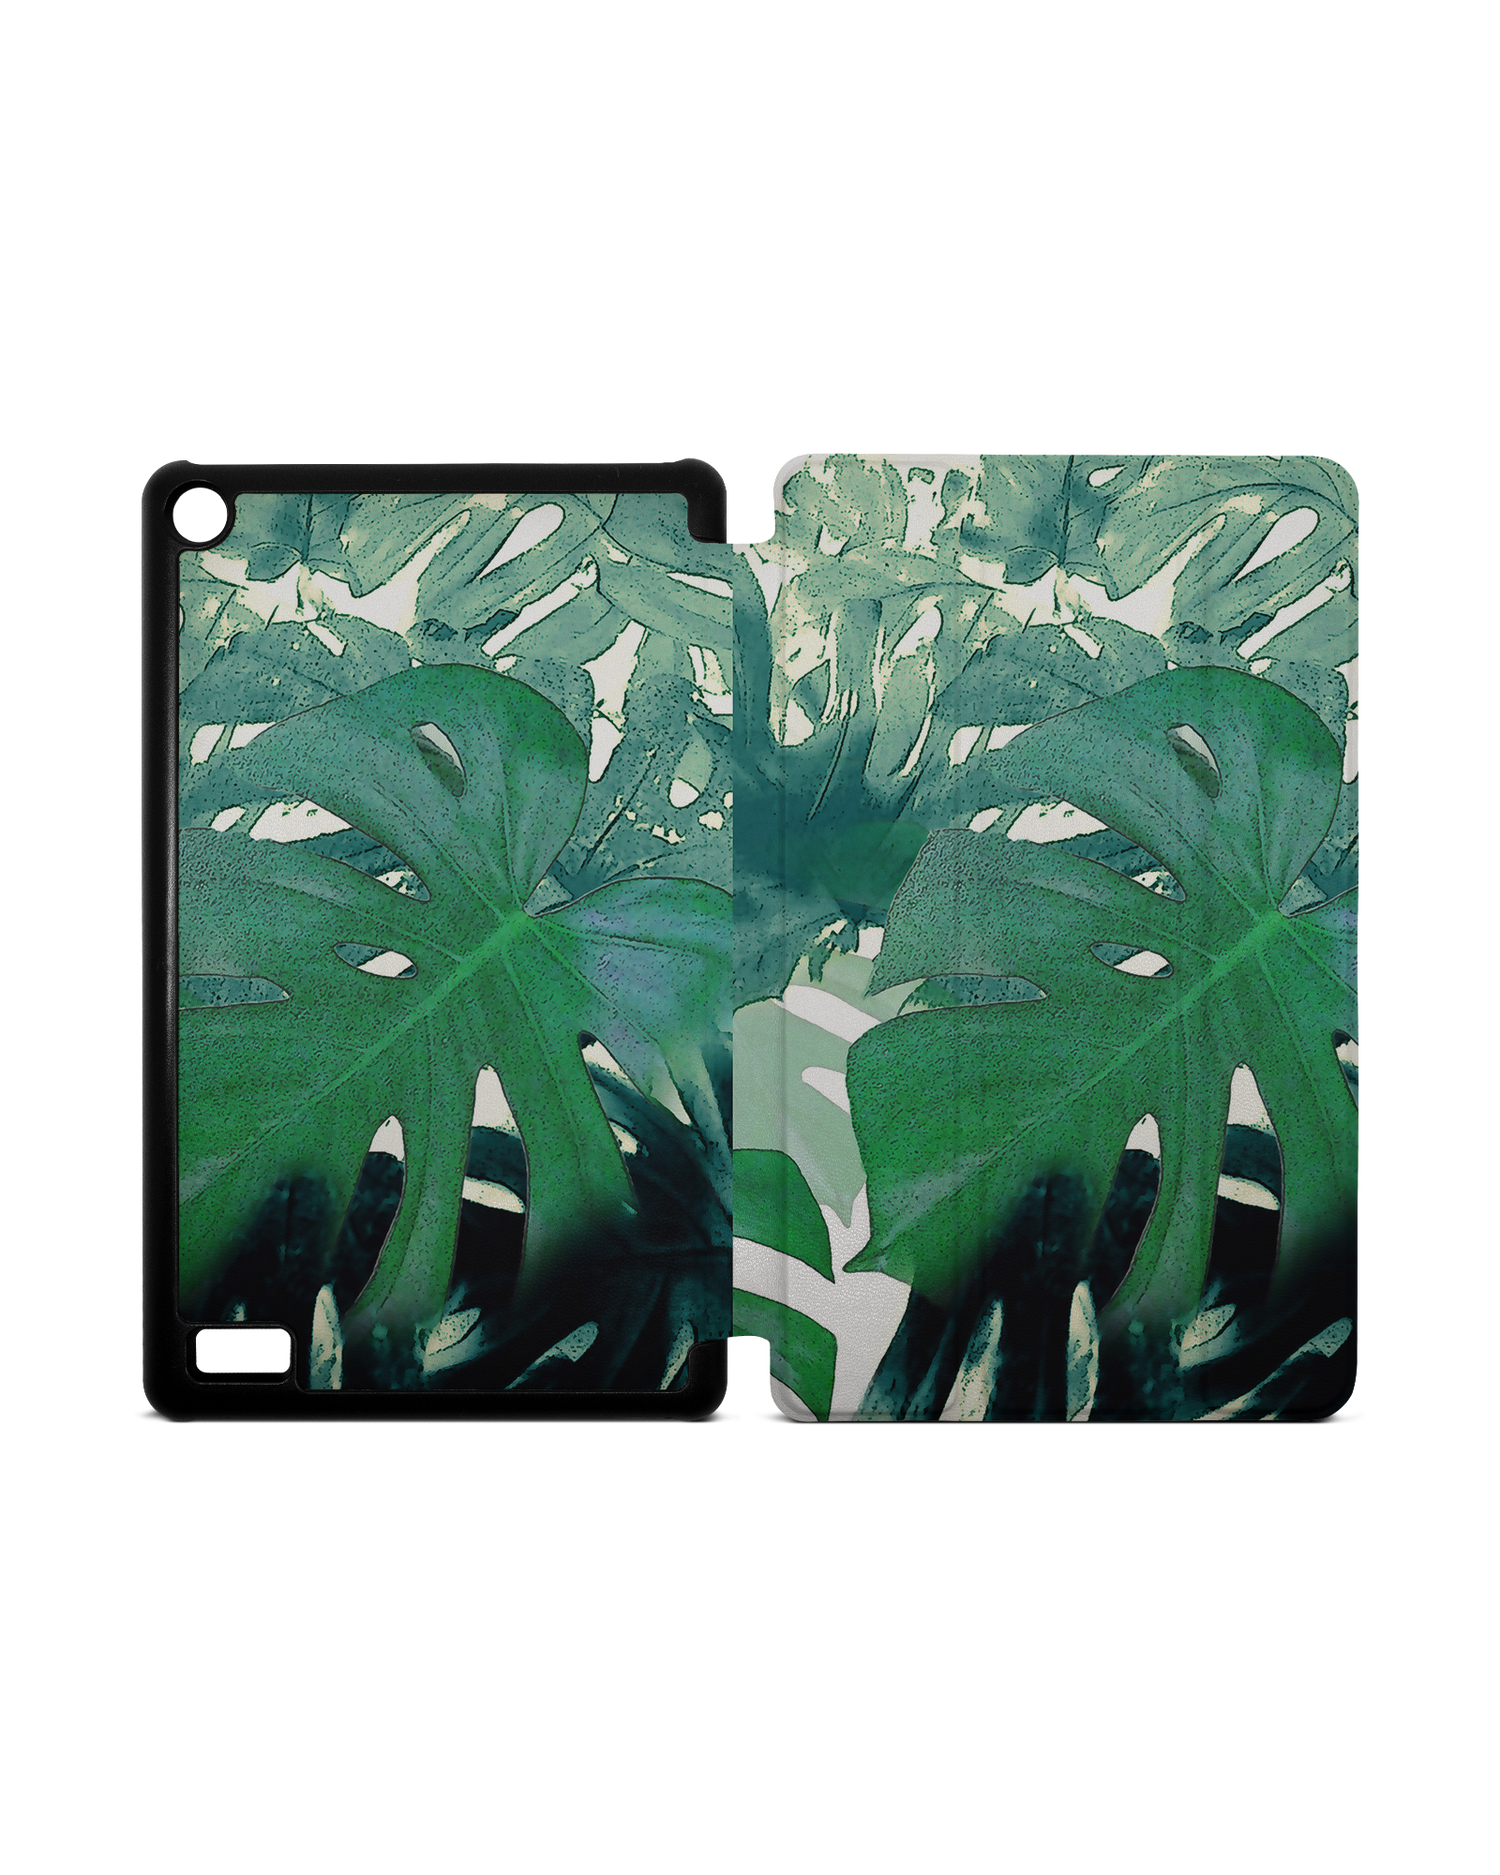 Saturated Plants Tablet Smart Case for Amazon Fire 7: Opened